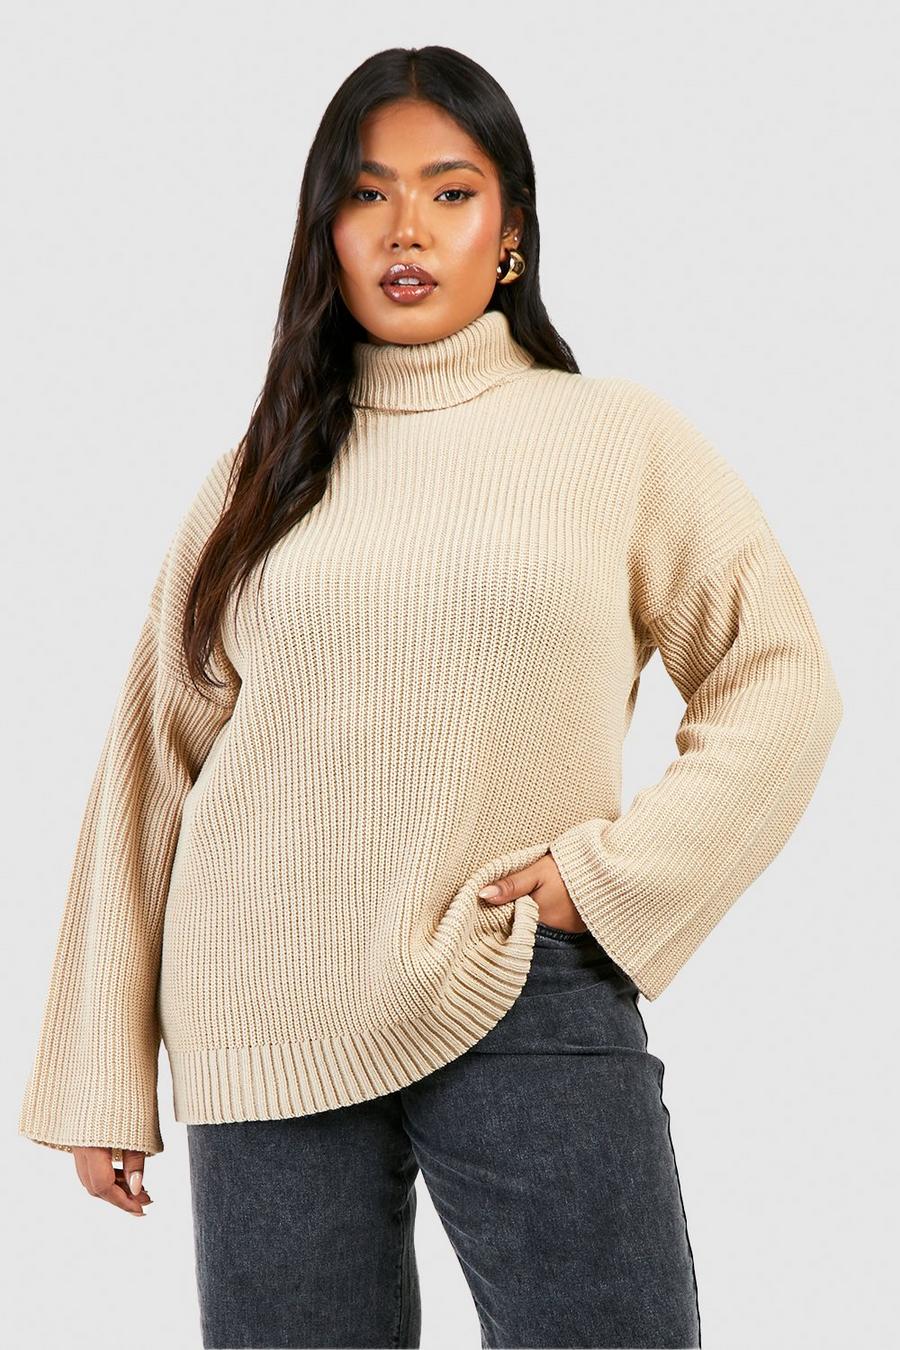 Ladies High Roll Polo Neck Top Women's Knitted Ribbed Jumper Sweater New UK Clothing Womens Clothing Jumpers 